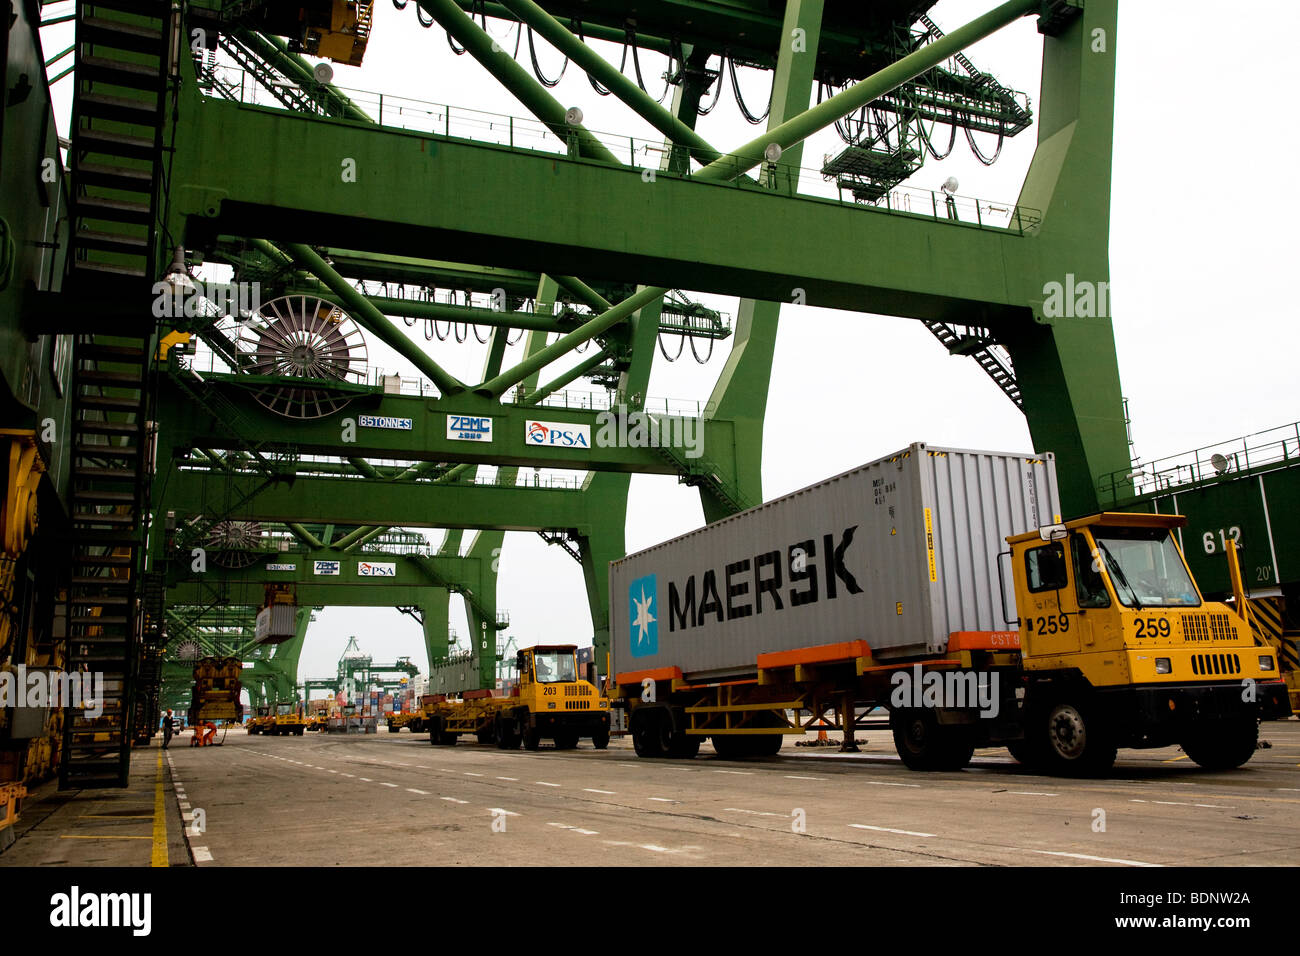 Maersk container on truck in port quayside Stock Photo